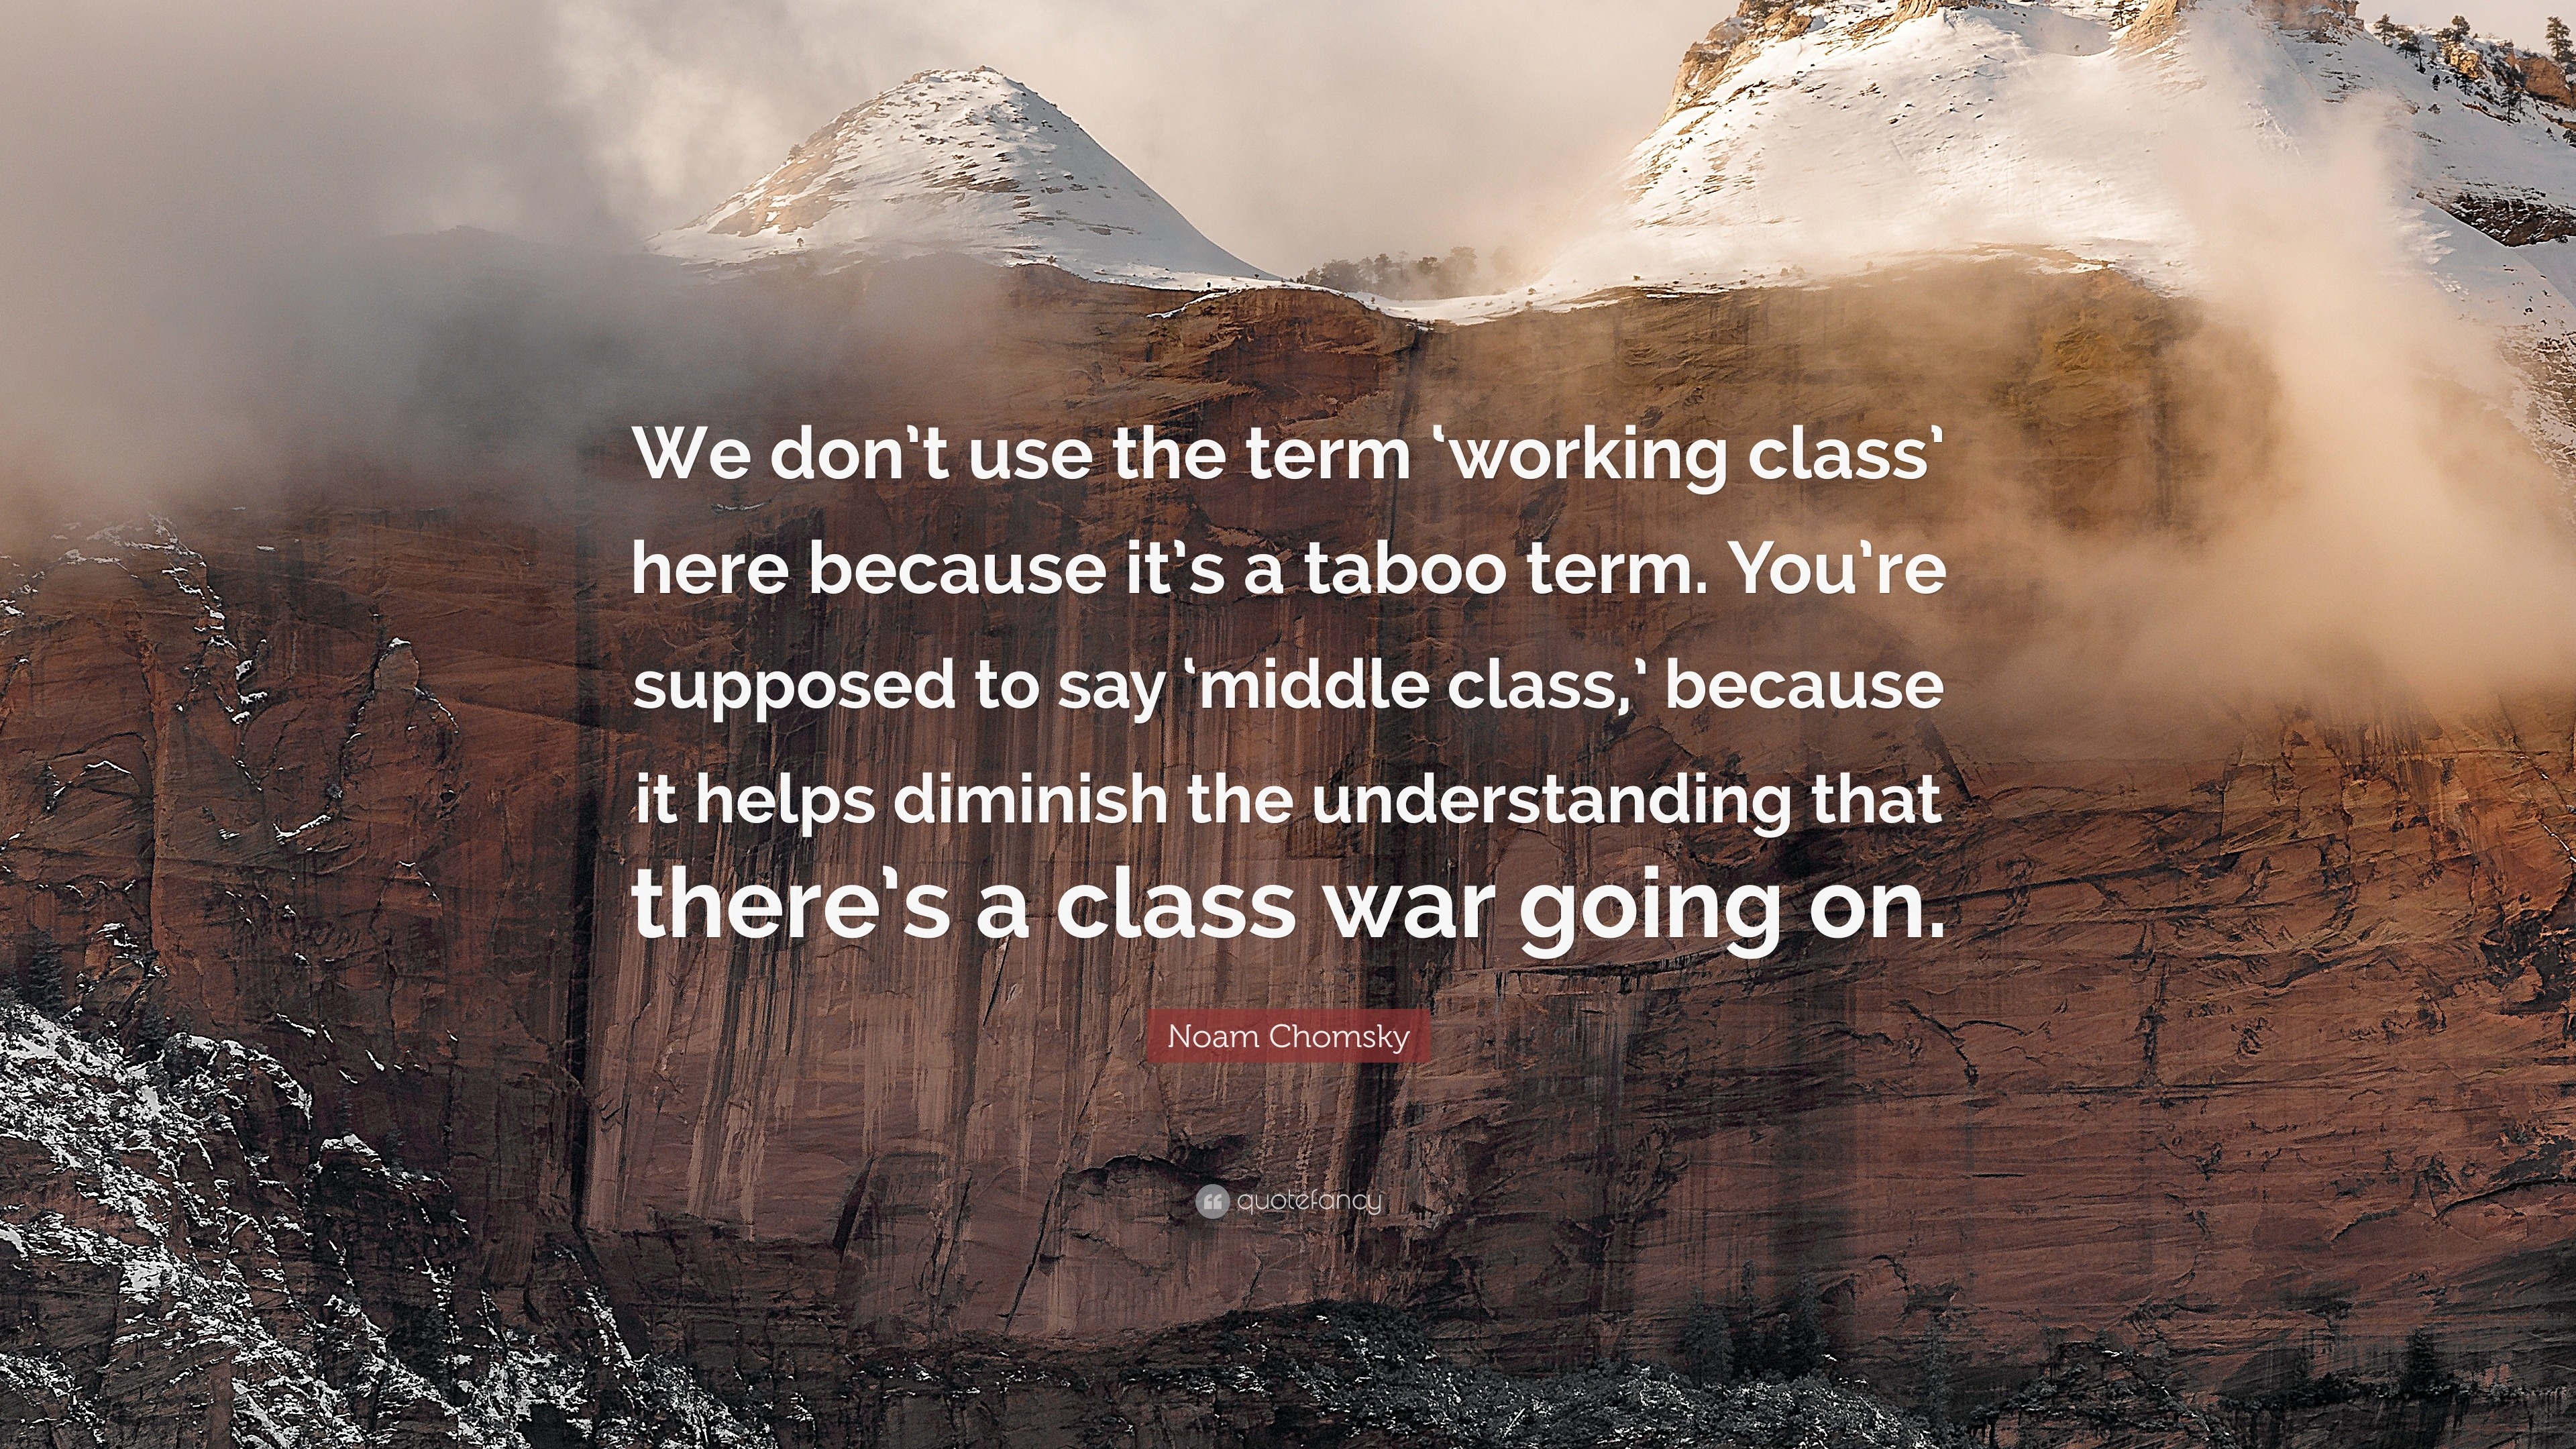 1942720-Noam-Chomsky-Quote-We-don-t-use-the-term-working-class-here.jpg